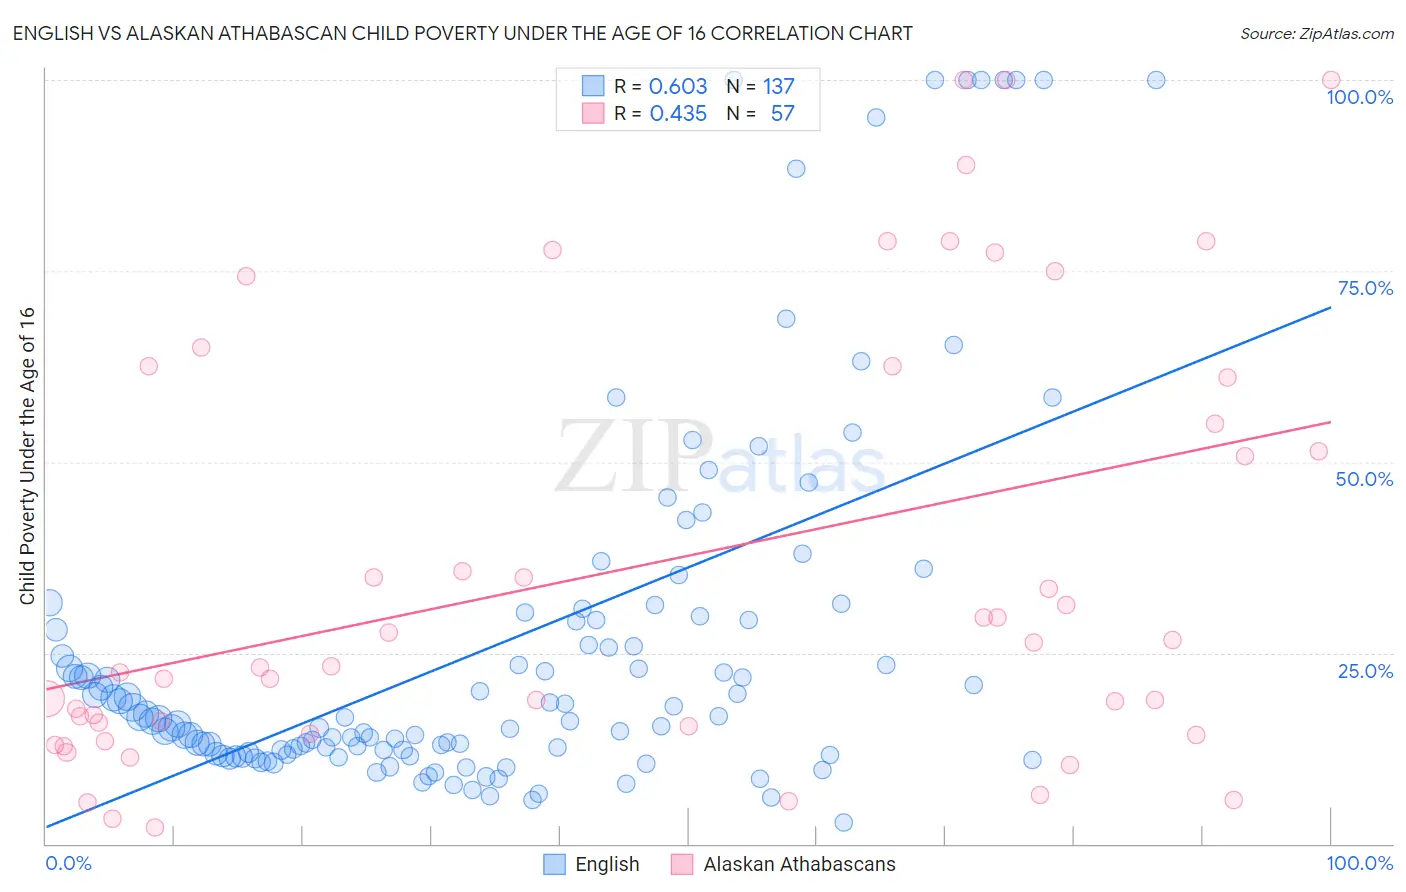 English vs Alaskan Athabascan Child Poverty Under the Age of 16